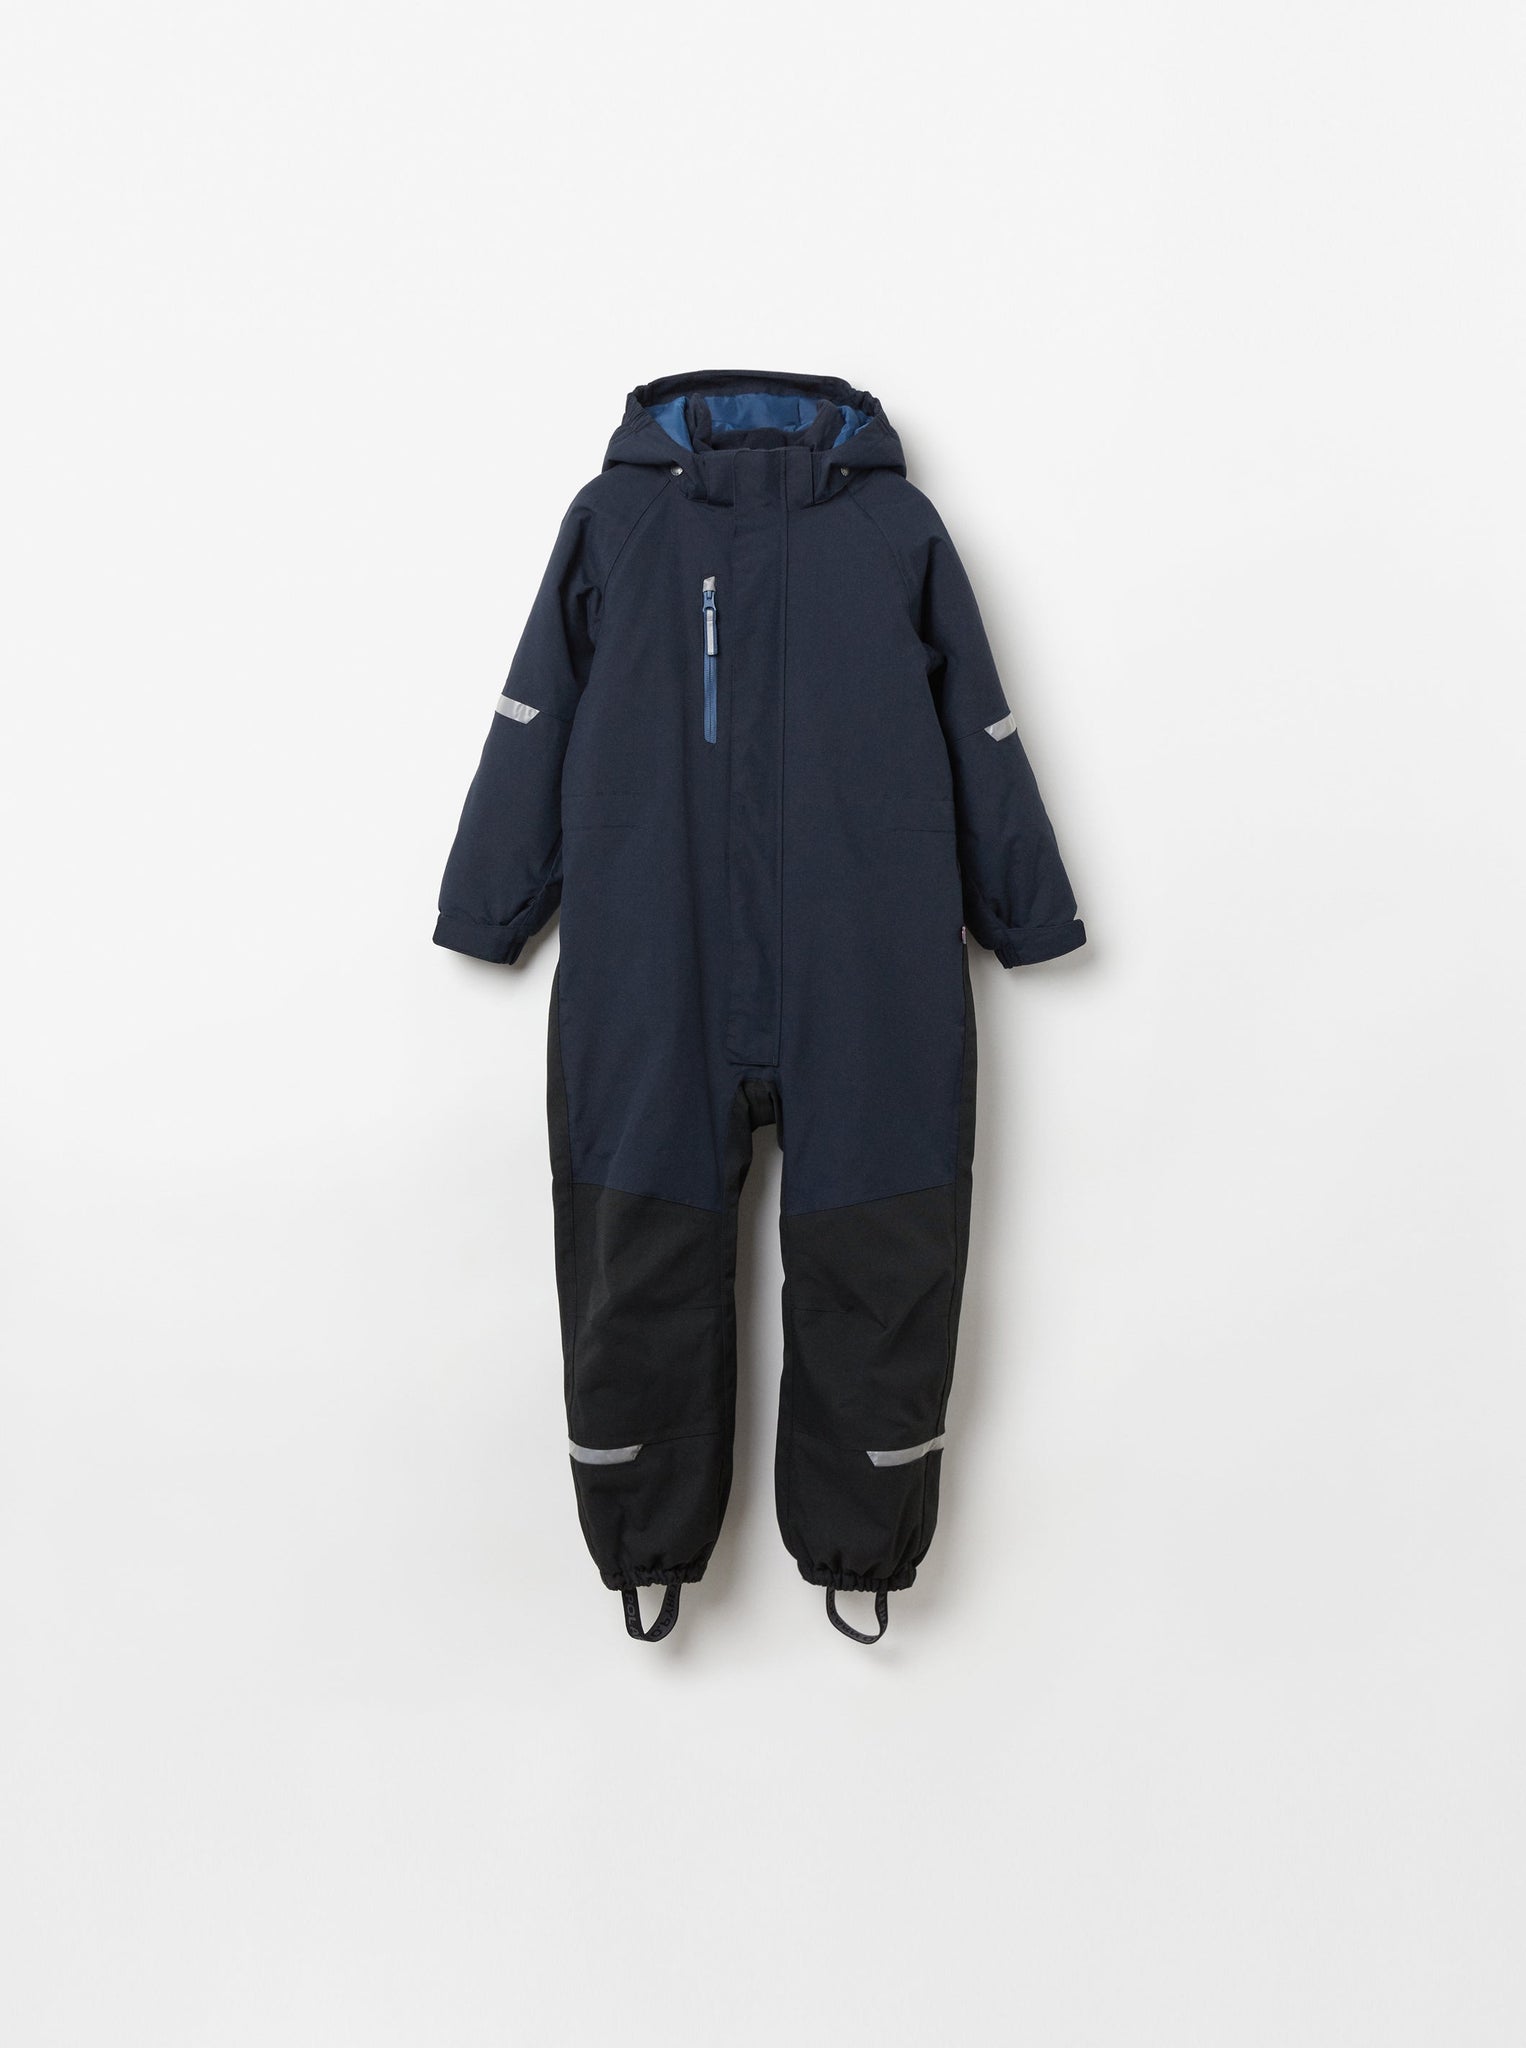 Navy Kids Waterproof Overall from the Polarn O. Pyret kidswear collection. Sustainably produced kids outerwear.